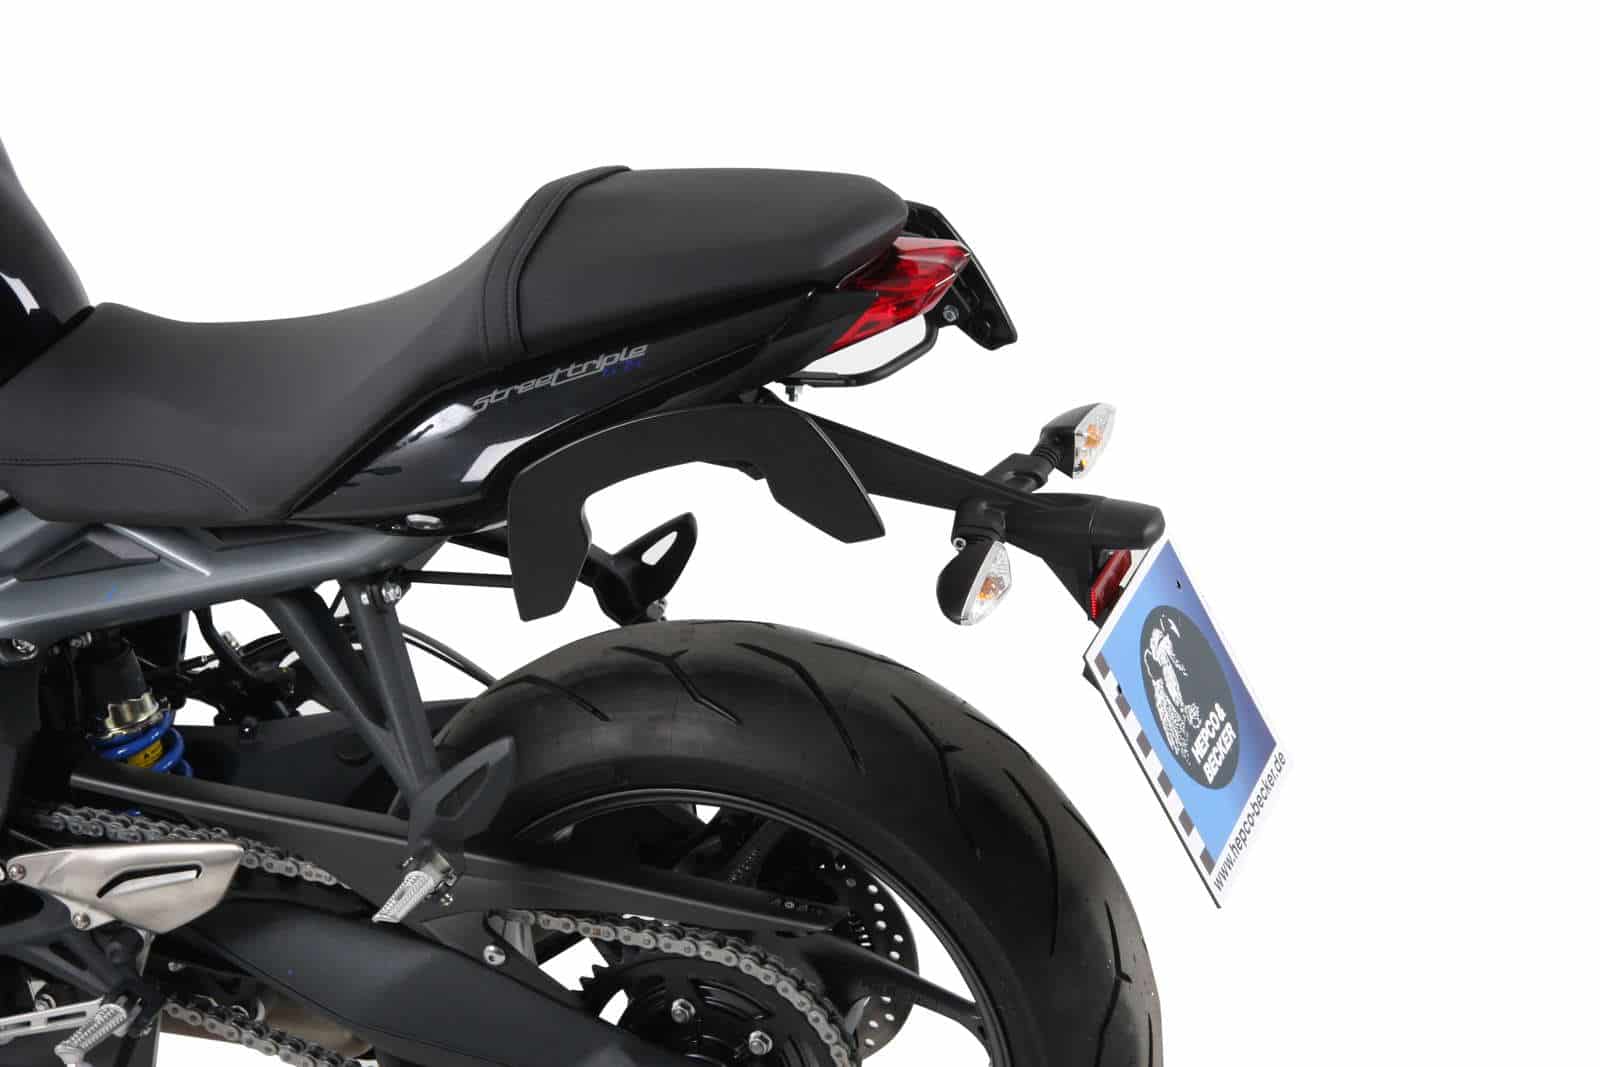 C-Bow sidecarrier for Triumph Street Triple 675/R (2007-2012)